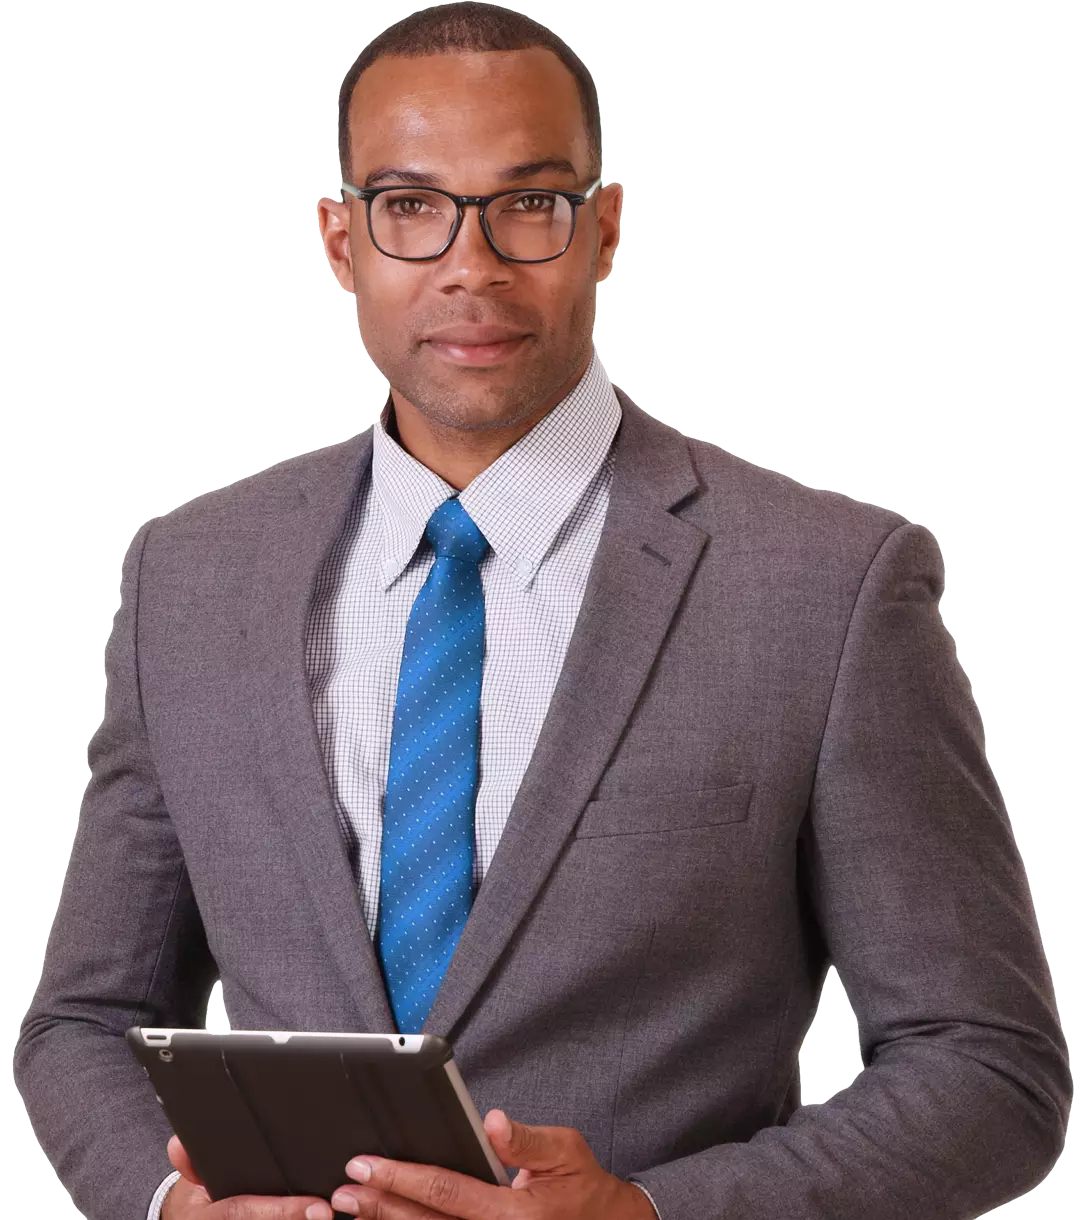 Man in suit using tablet, Form Simplicity for real estate brokers